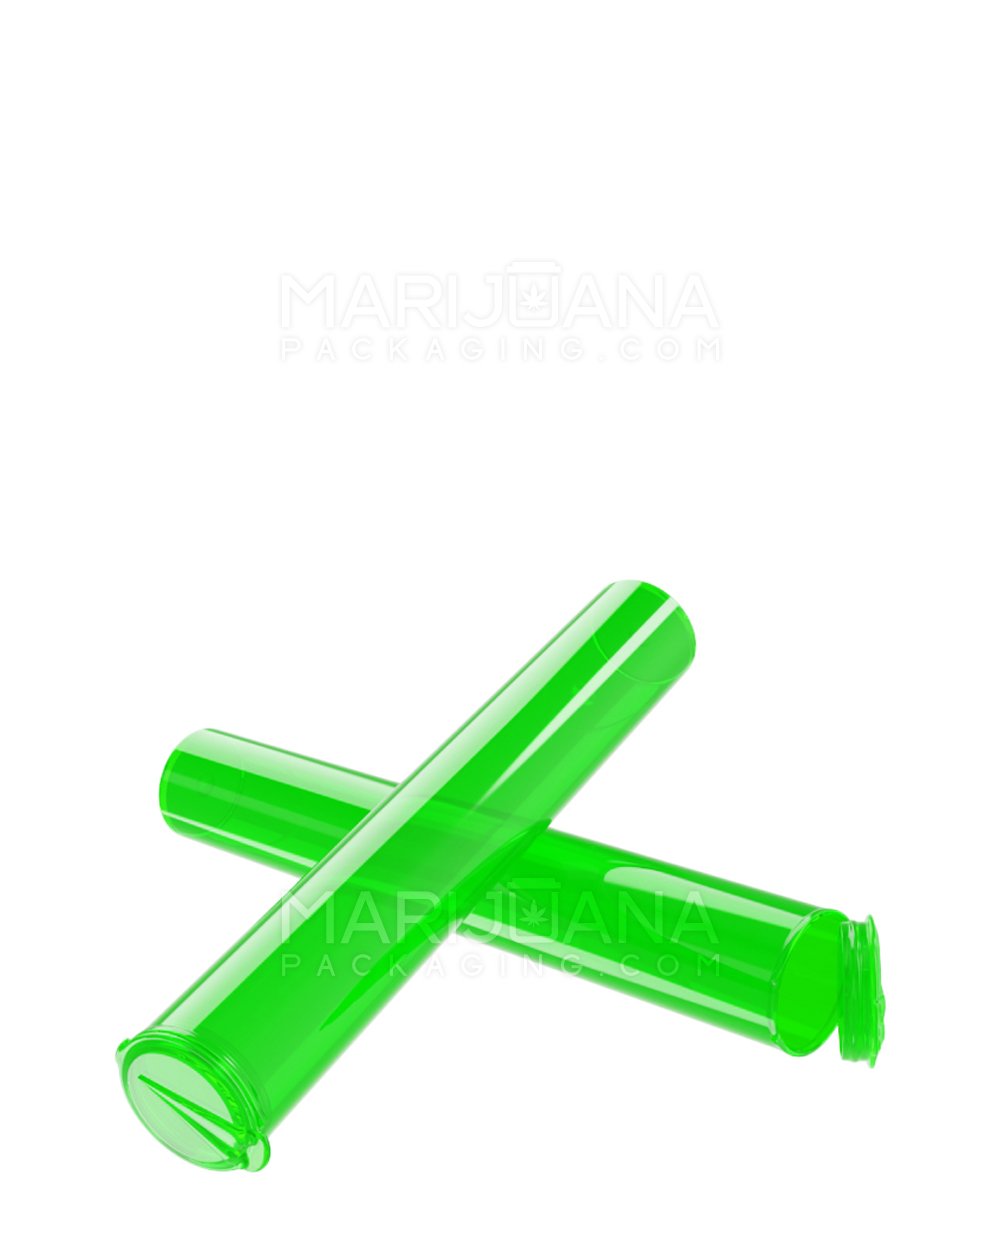 King Size Pop Top Translucent Plastic Pre-Roll Tubes | 116mm - Green - 100 Count - 6